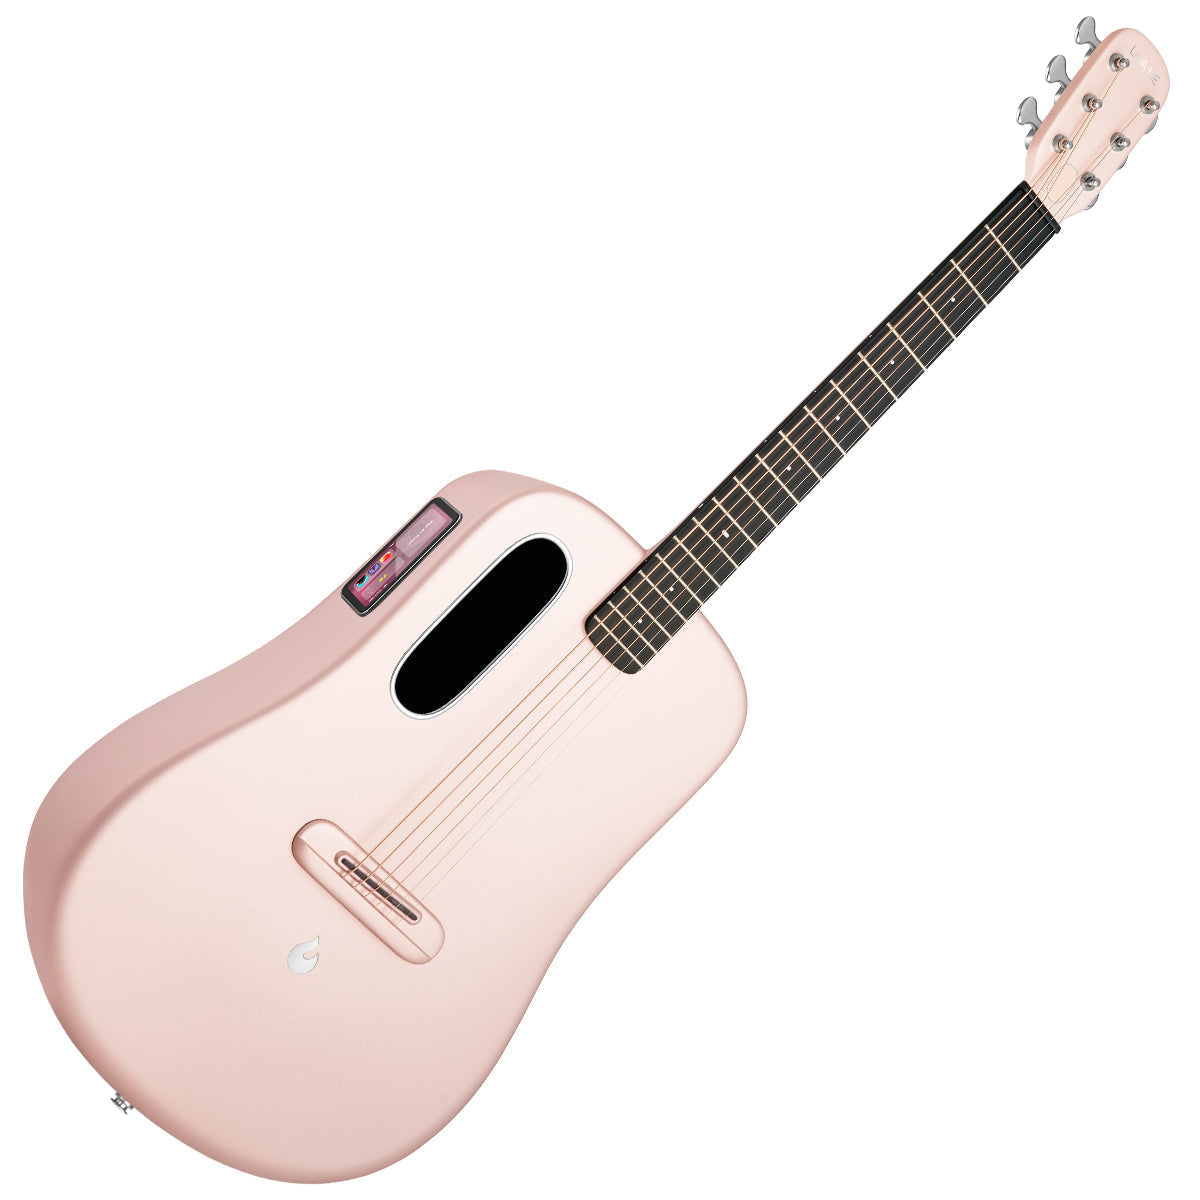 LAVA ME4 Carbon 38" with AirFlow Bag ~ Pink, Acoustic Guitar for sale at Richards Guitars.